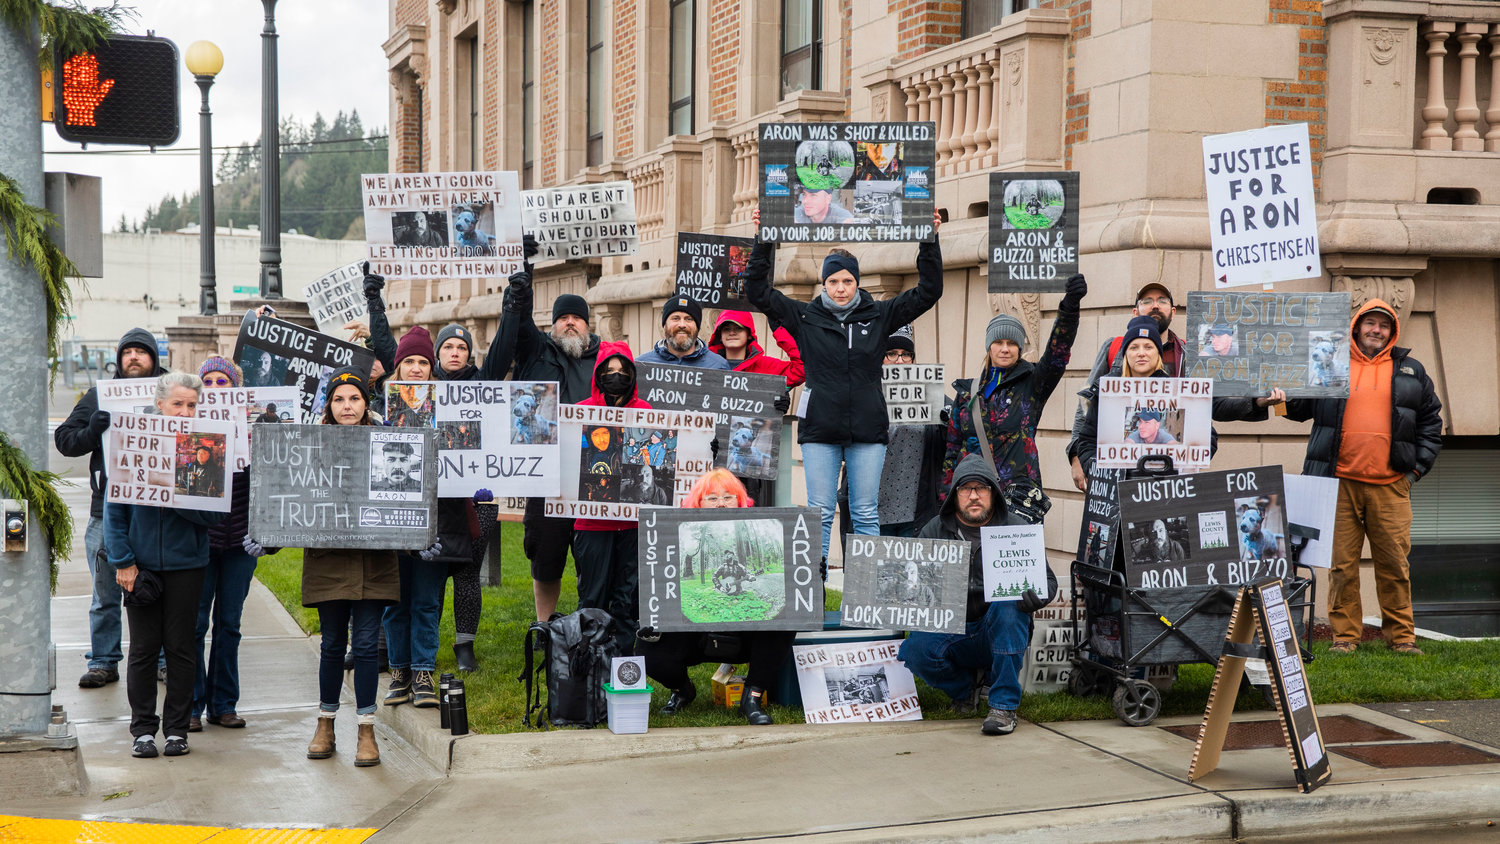 Friends of Aron Christensen pose for a photo while holding signs outside the Lewis County Courthouse while demanding justice in Chehalis on Sunday.